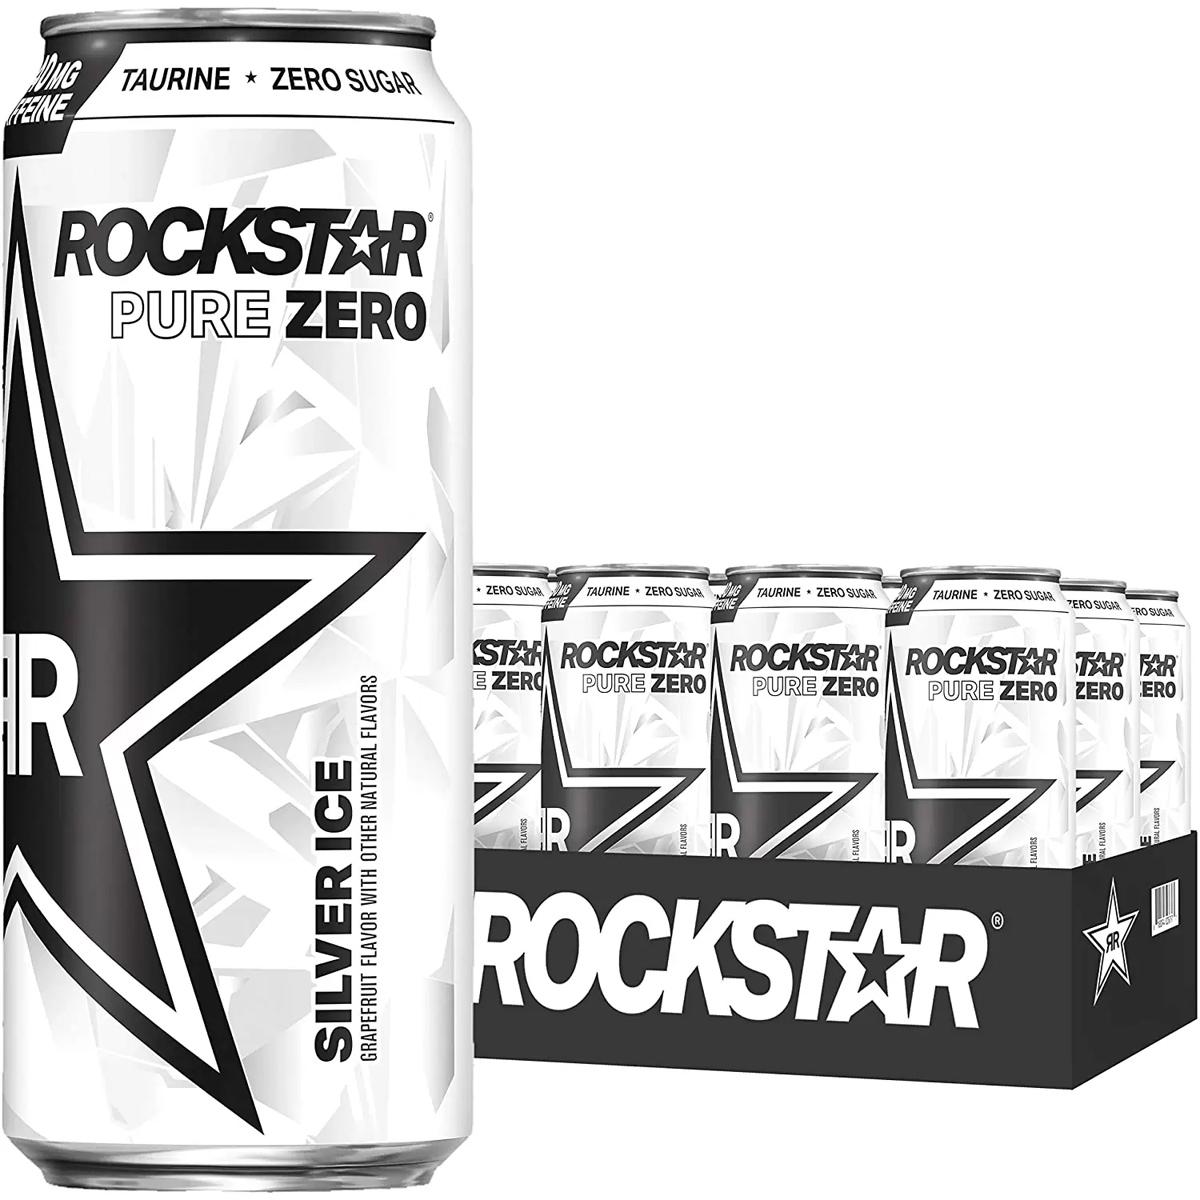 12 Rockstar Pure Zero Energy Drink for $11.40 Shipped